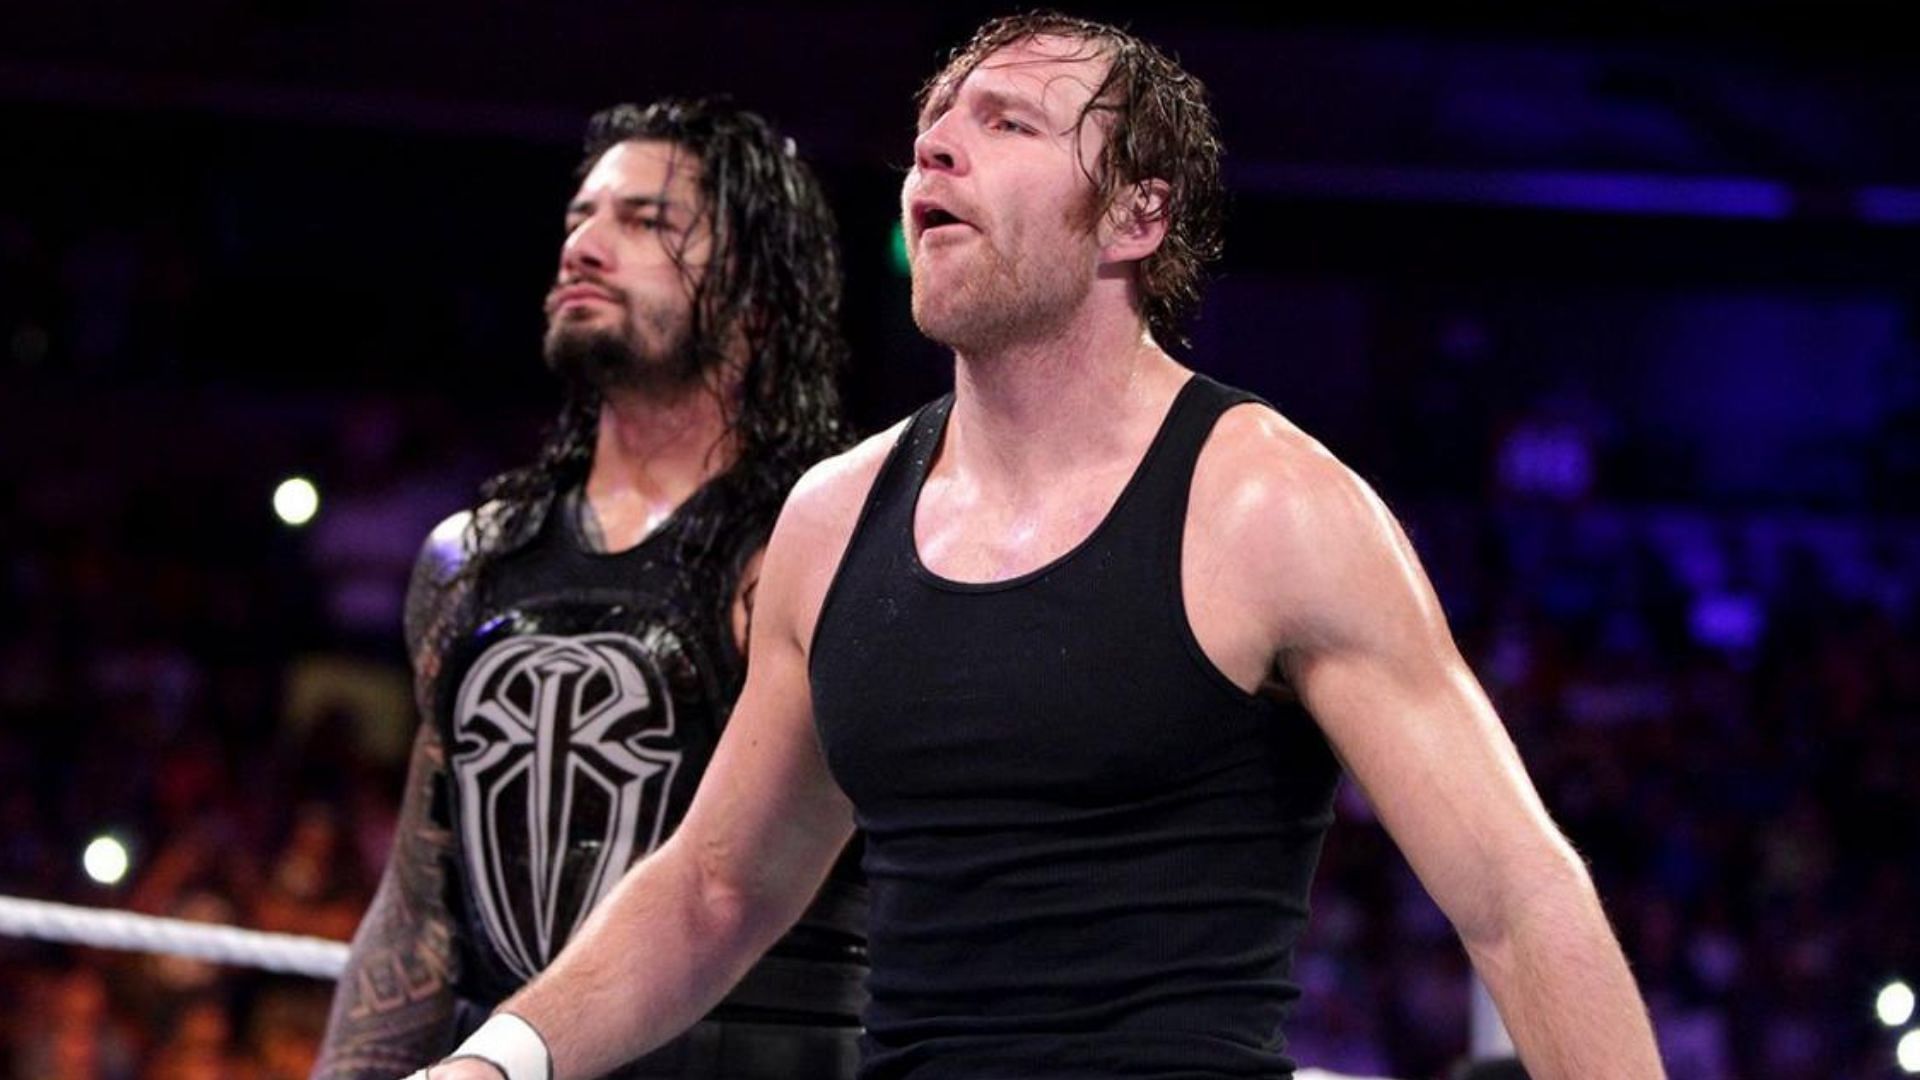 Roman Reigns and Dean Ambrose (Jon Moxley in AEW) 